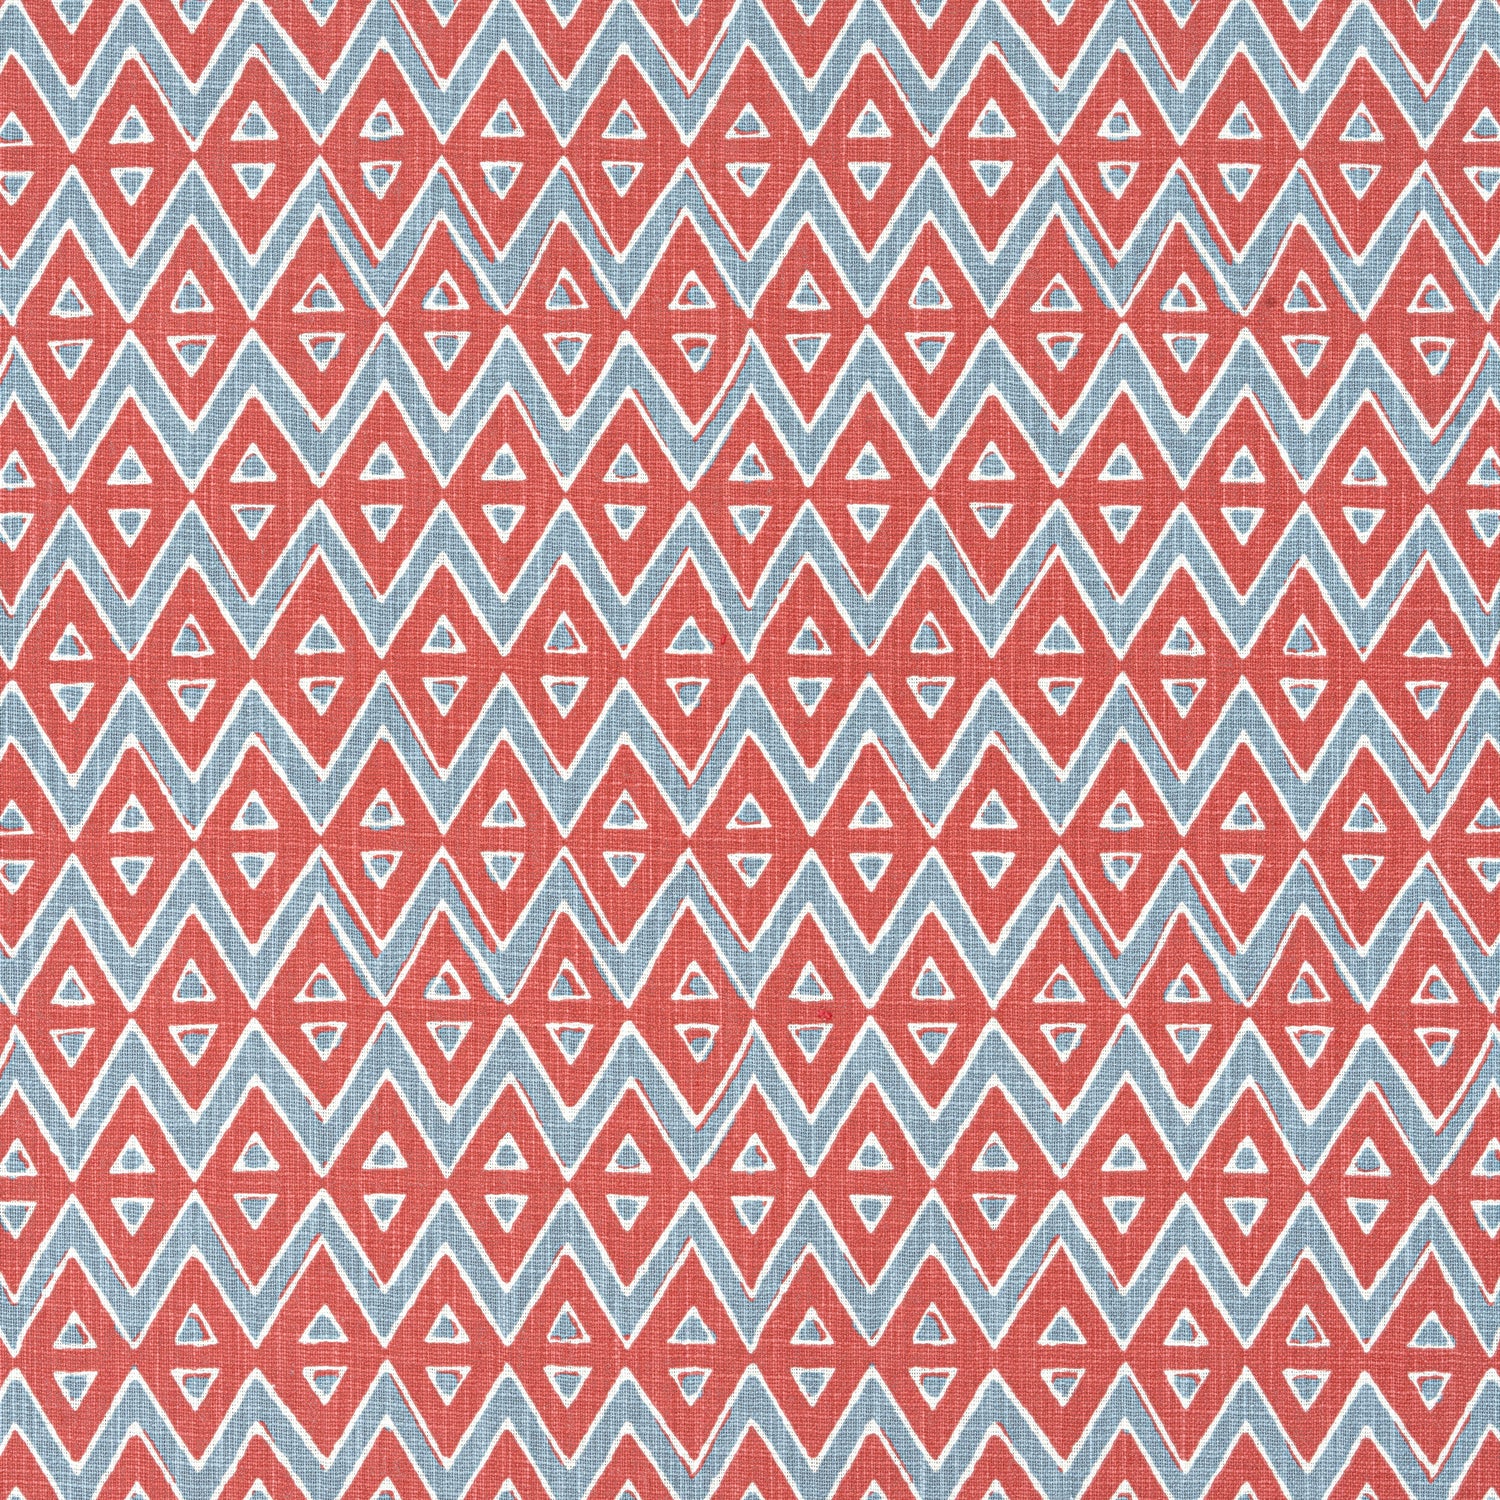 Tiburon fabric in coral color - pattern number F913238 - by Thibaut in the Mesa collection